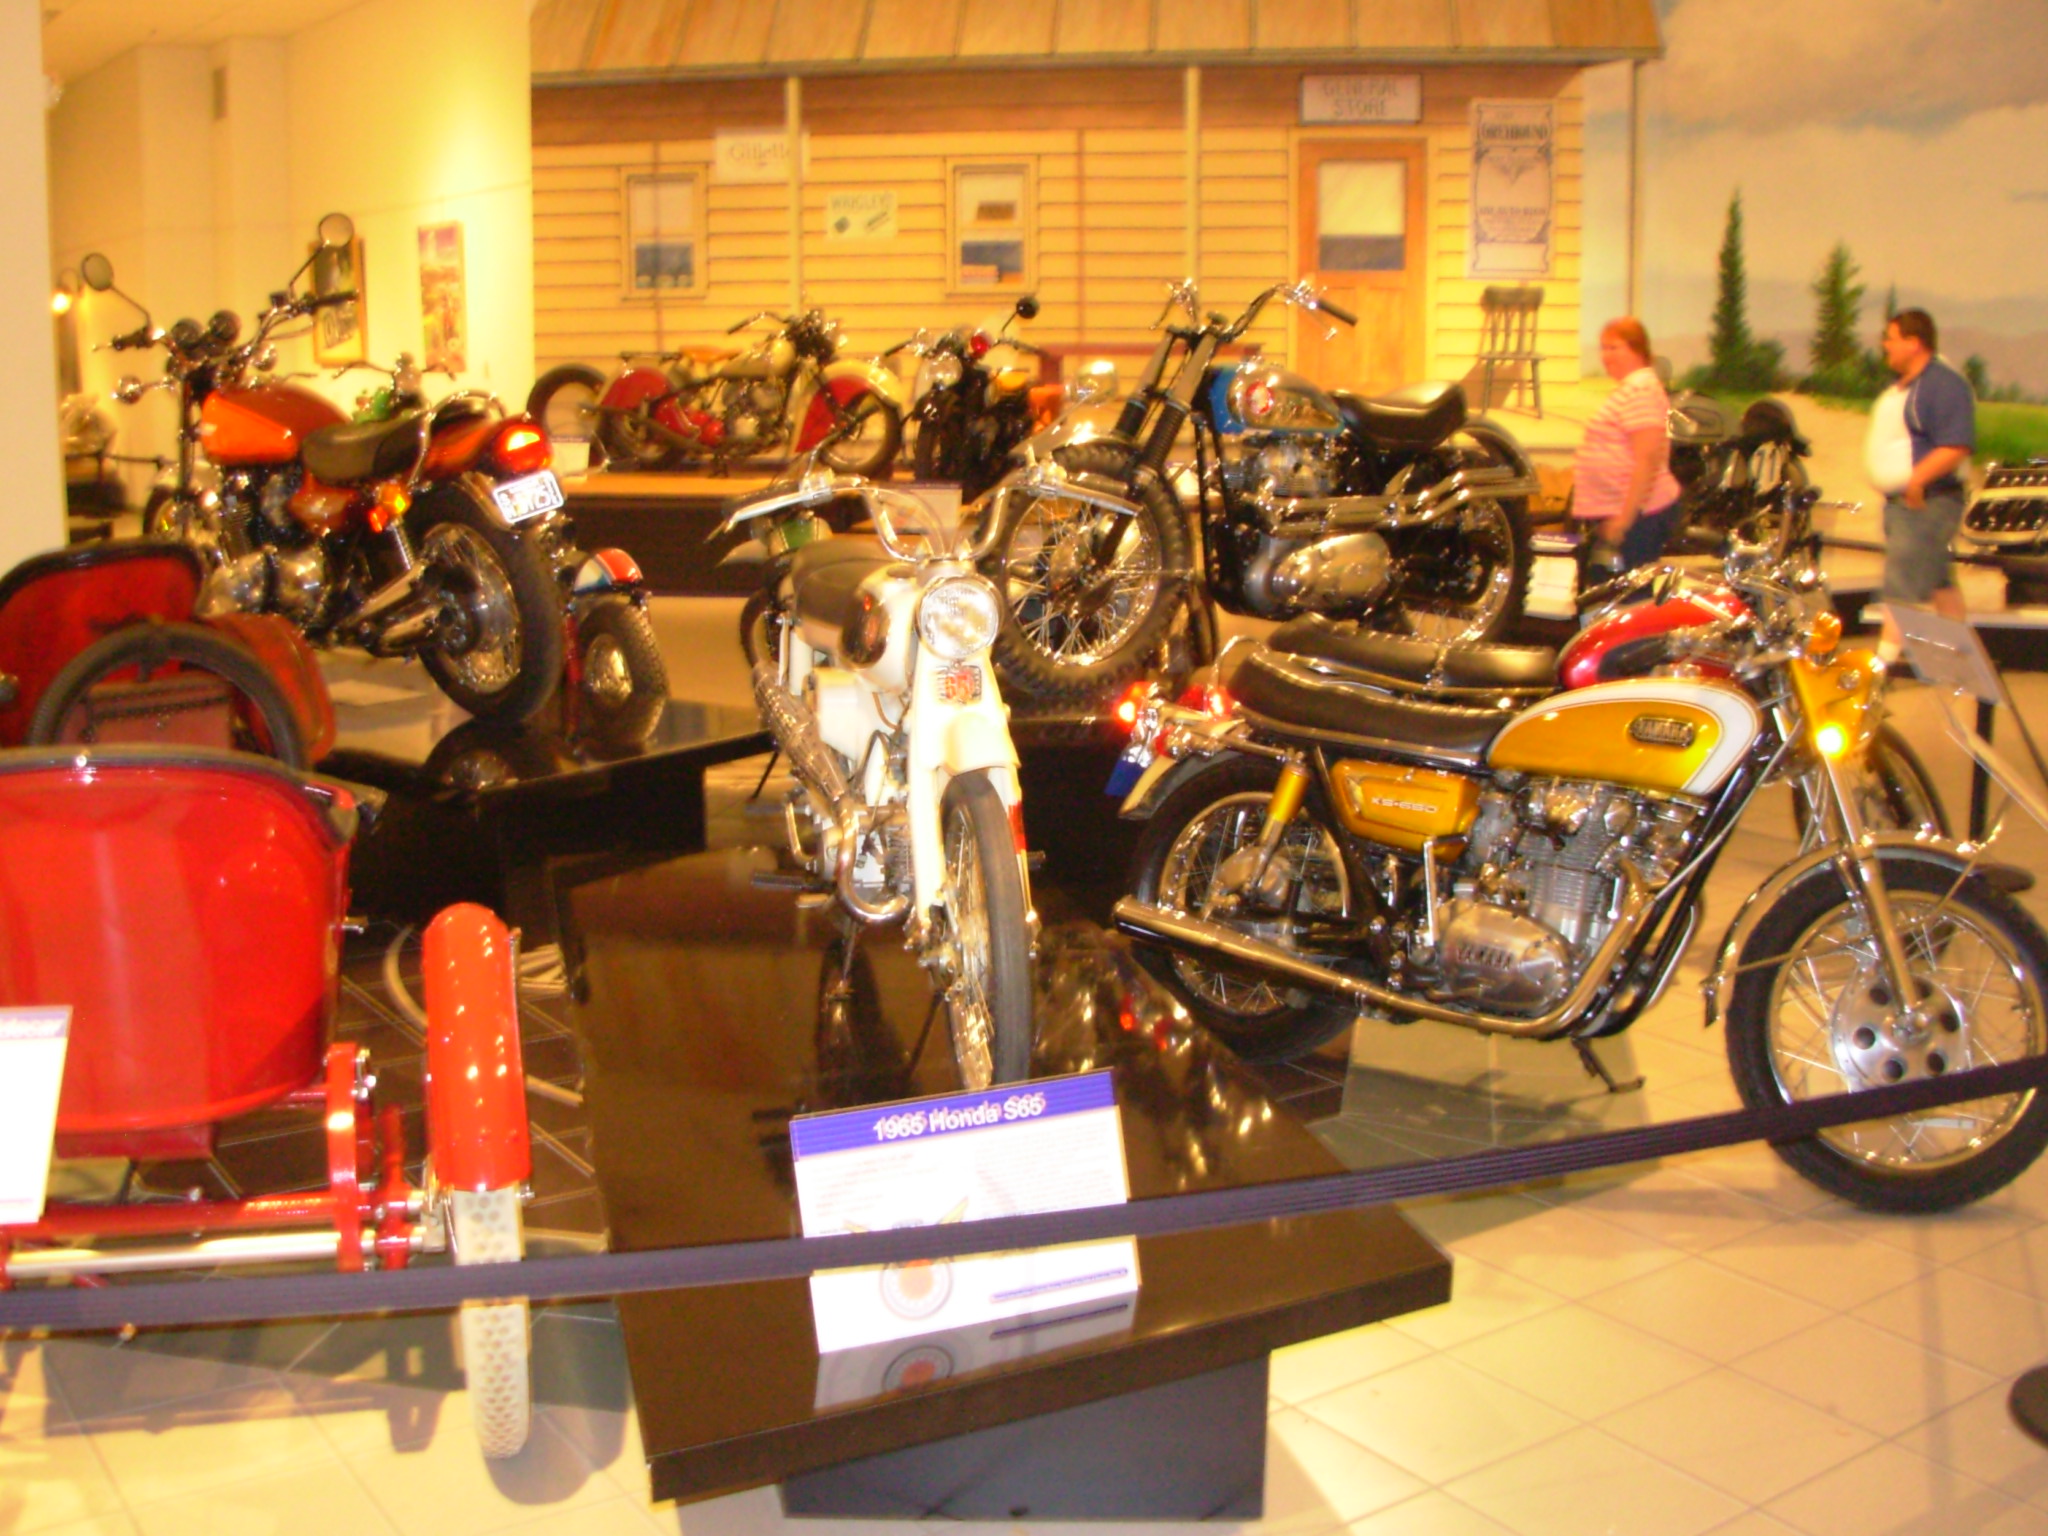 The motorcycle display is awsome!
